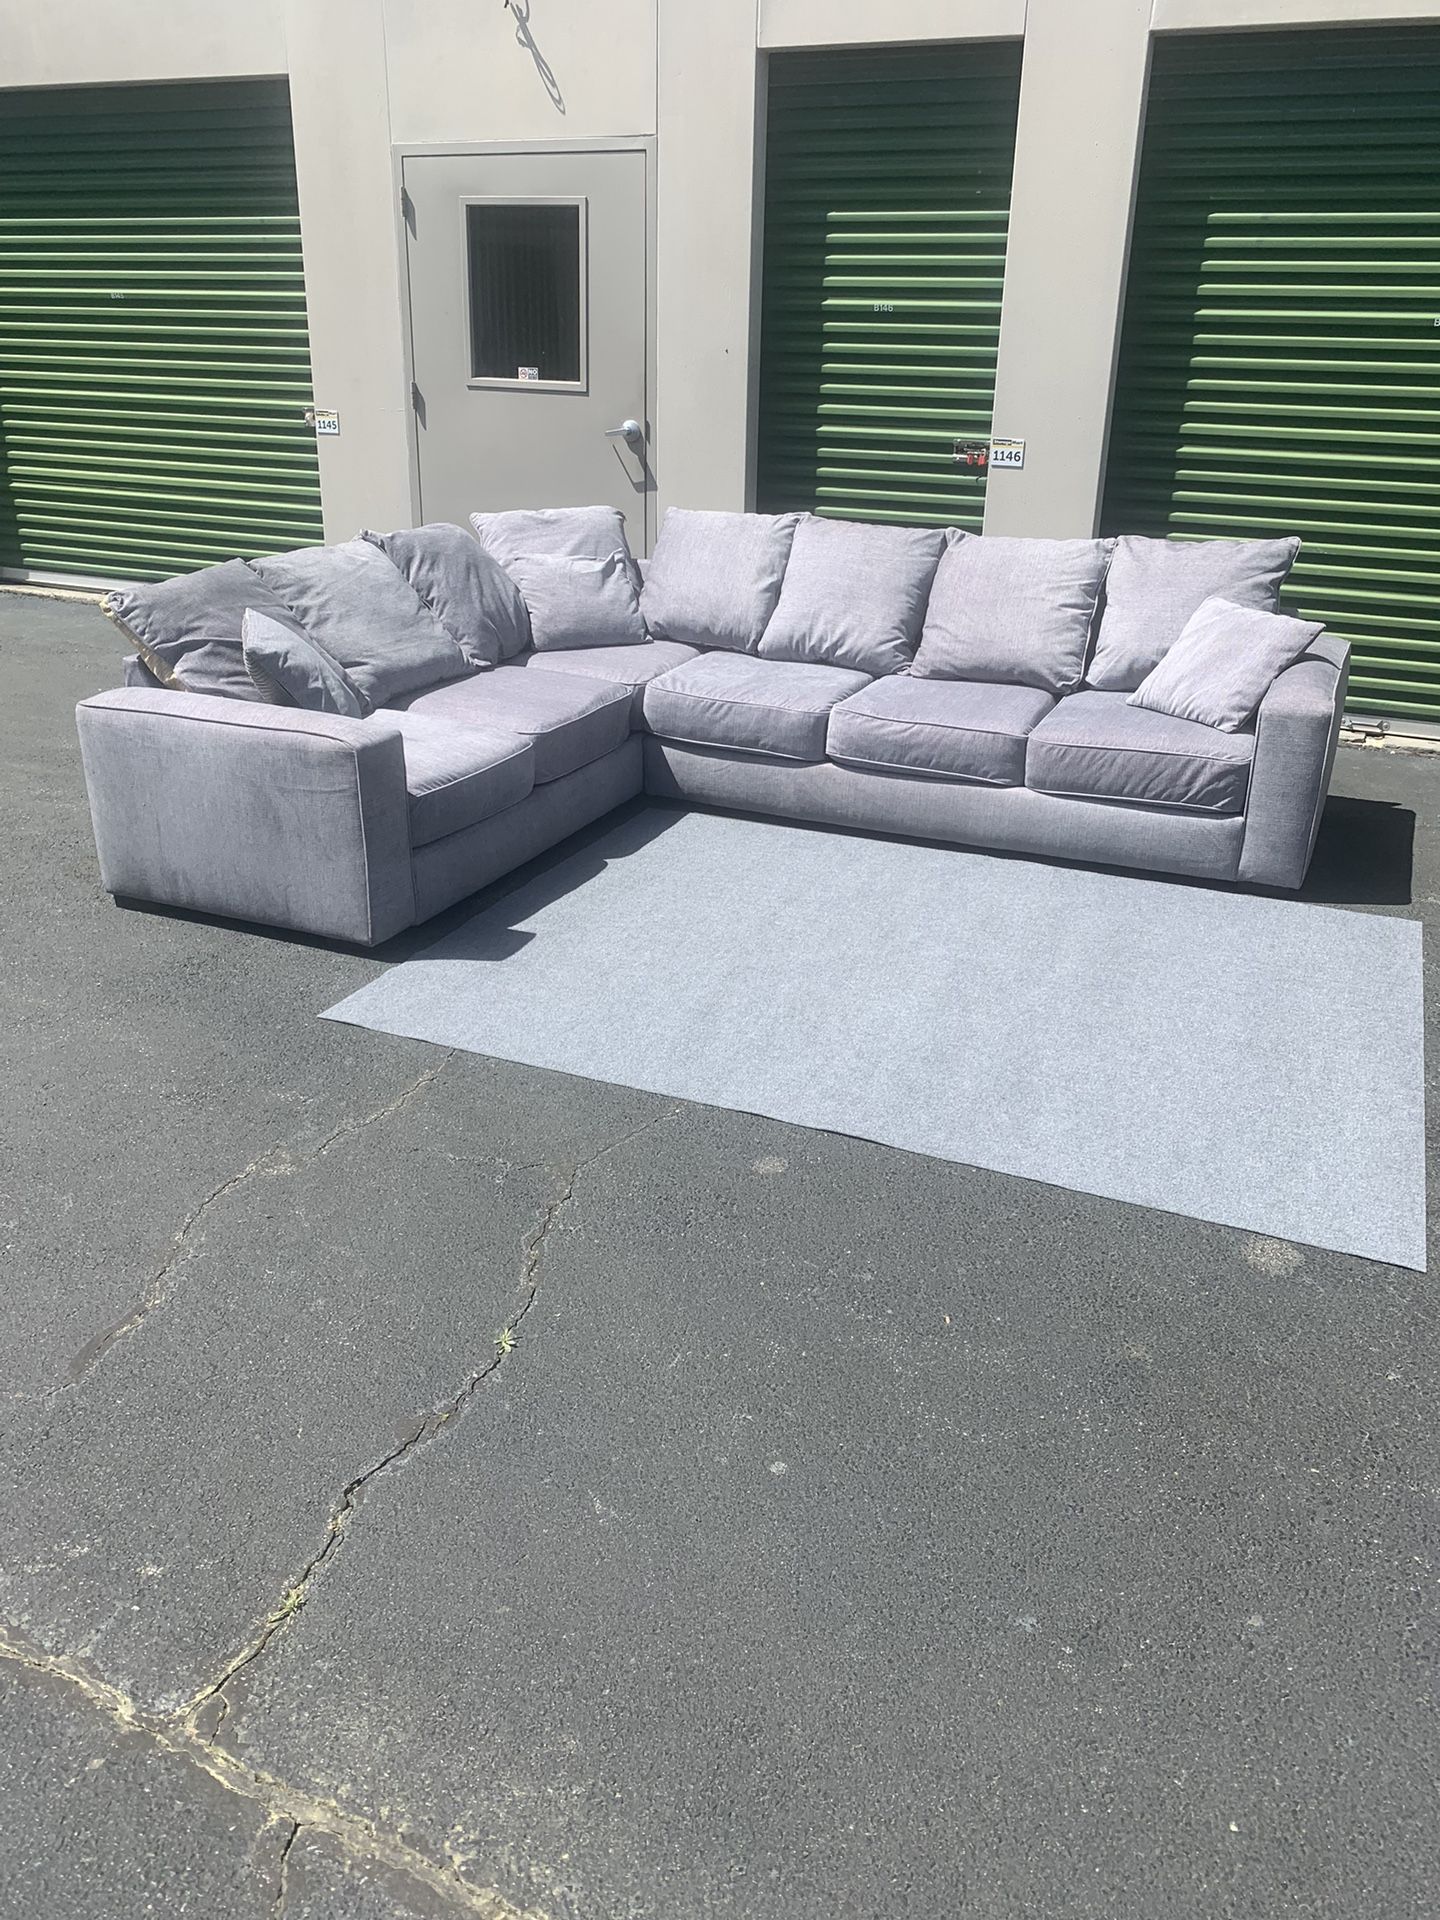 Grey Premium Sectional Couch Local Delivery 🚚 💨